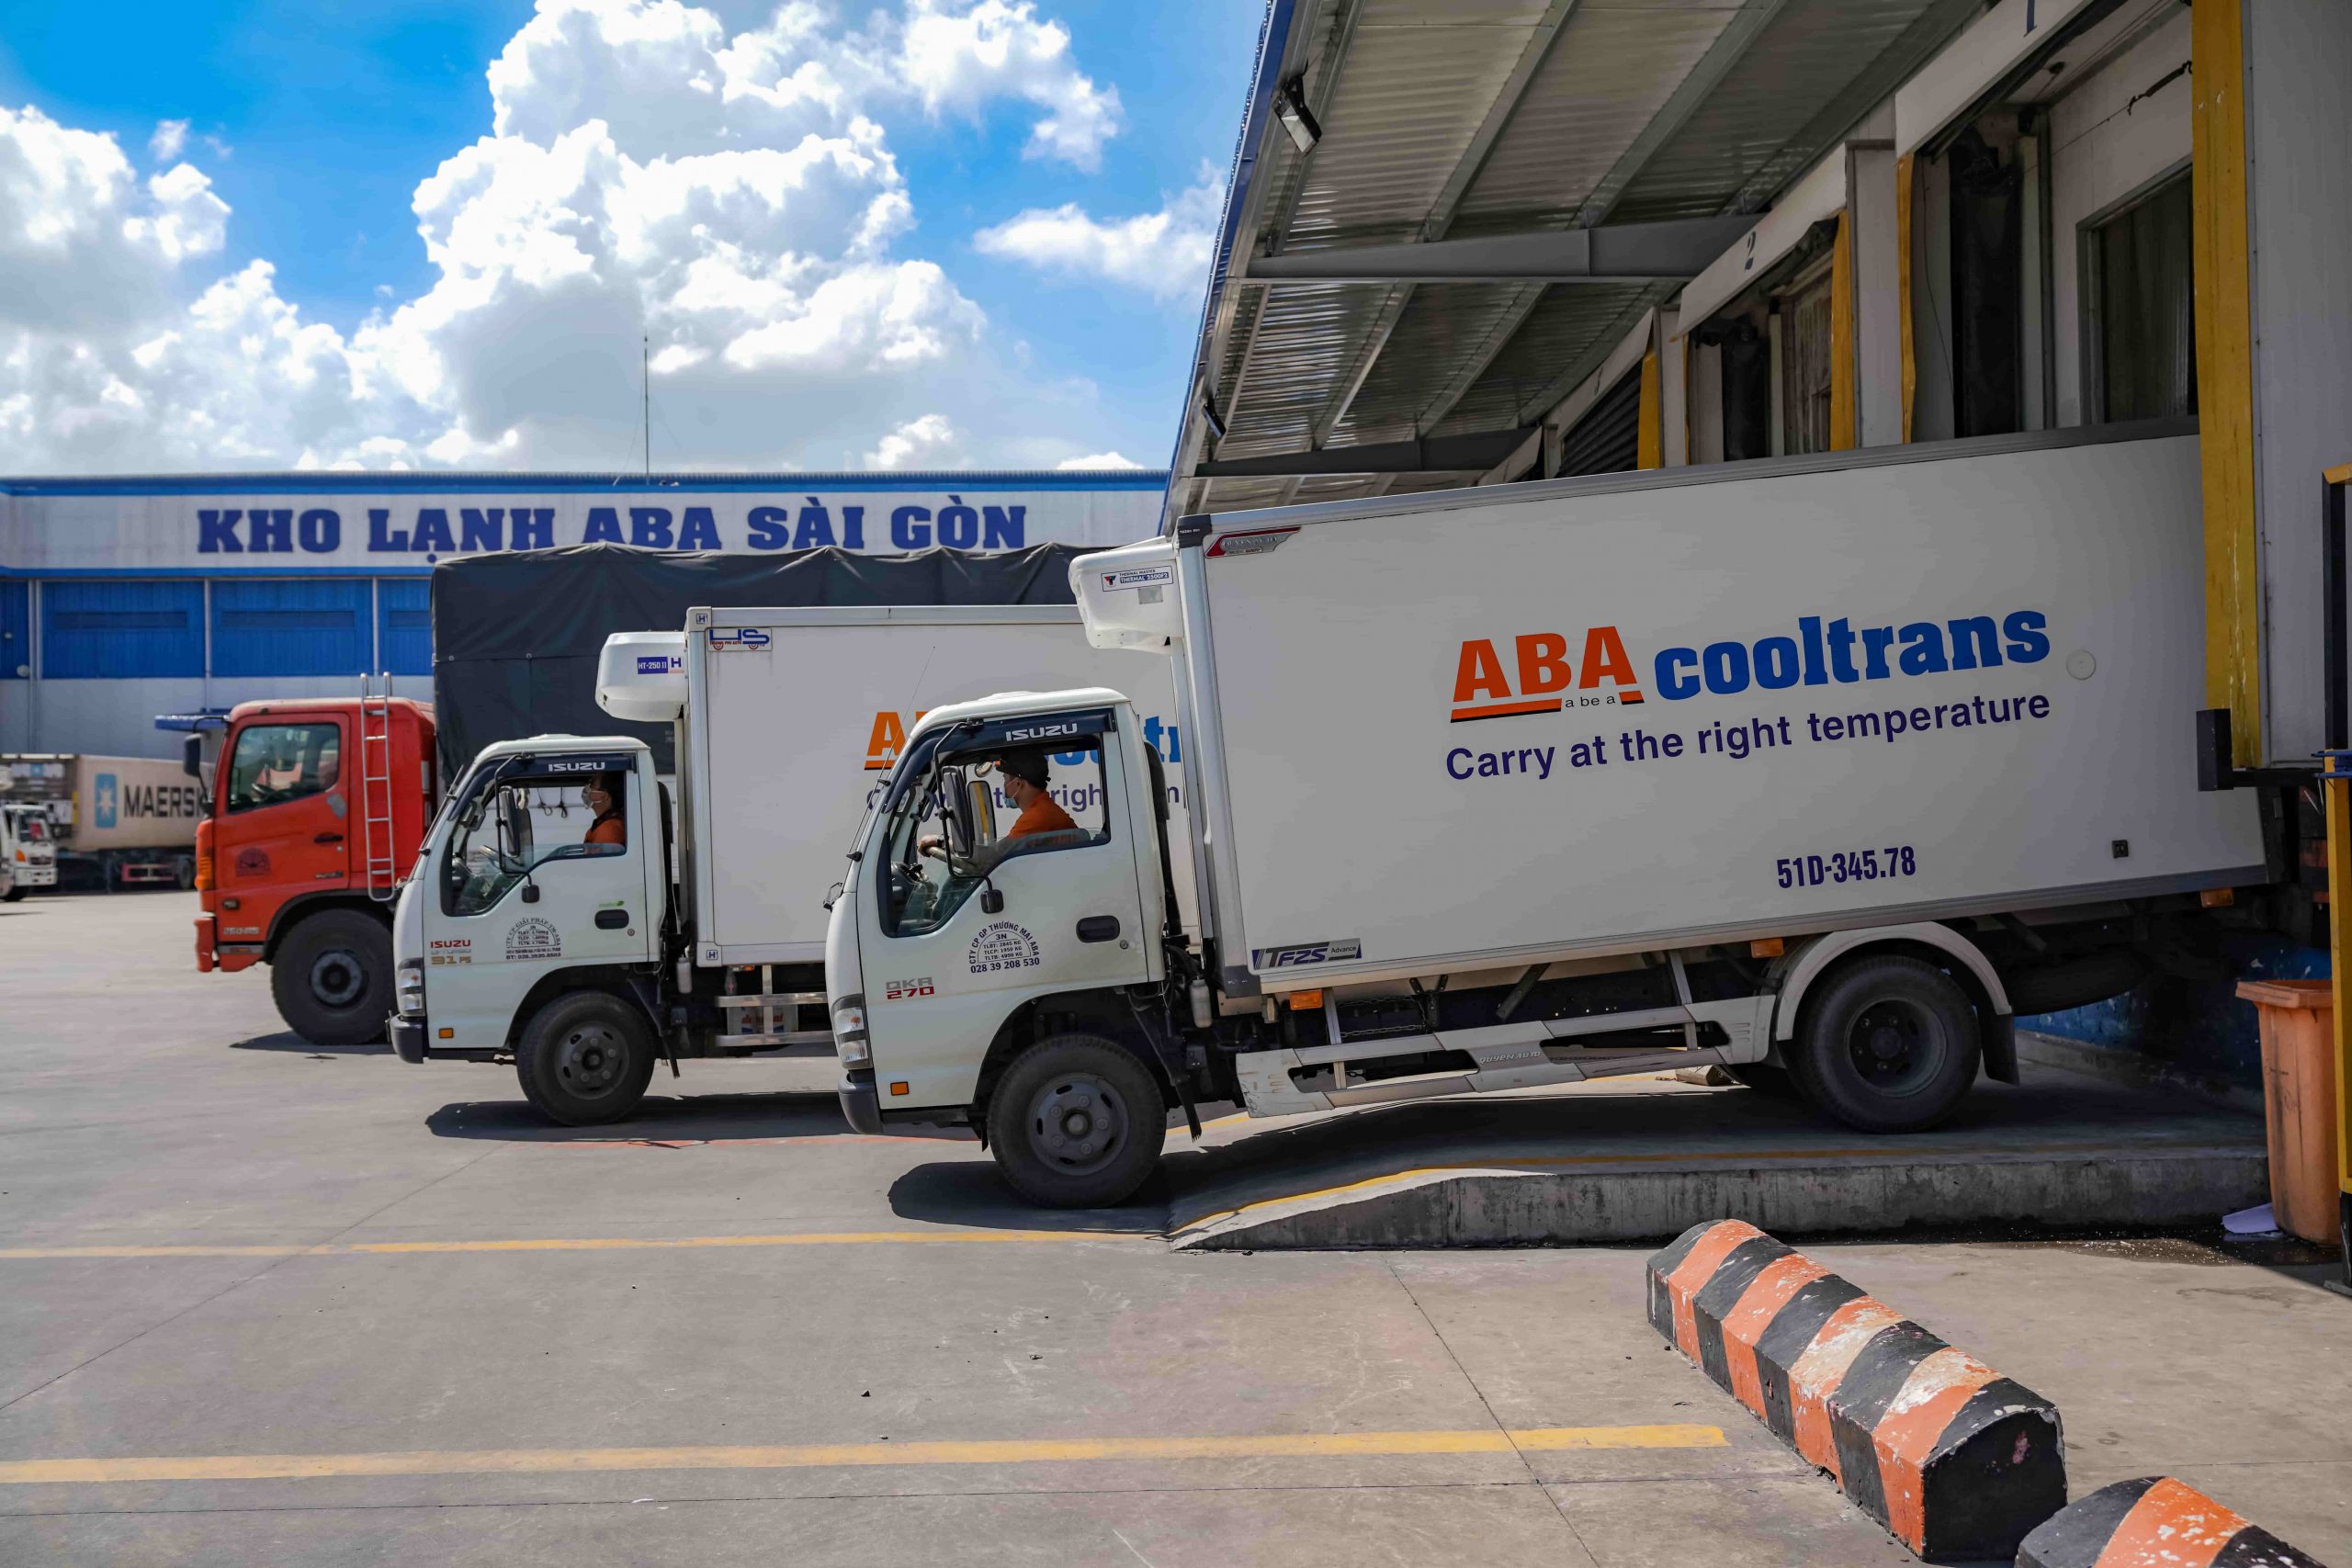 ABA cold storage's cars